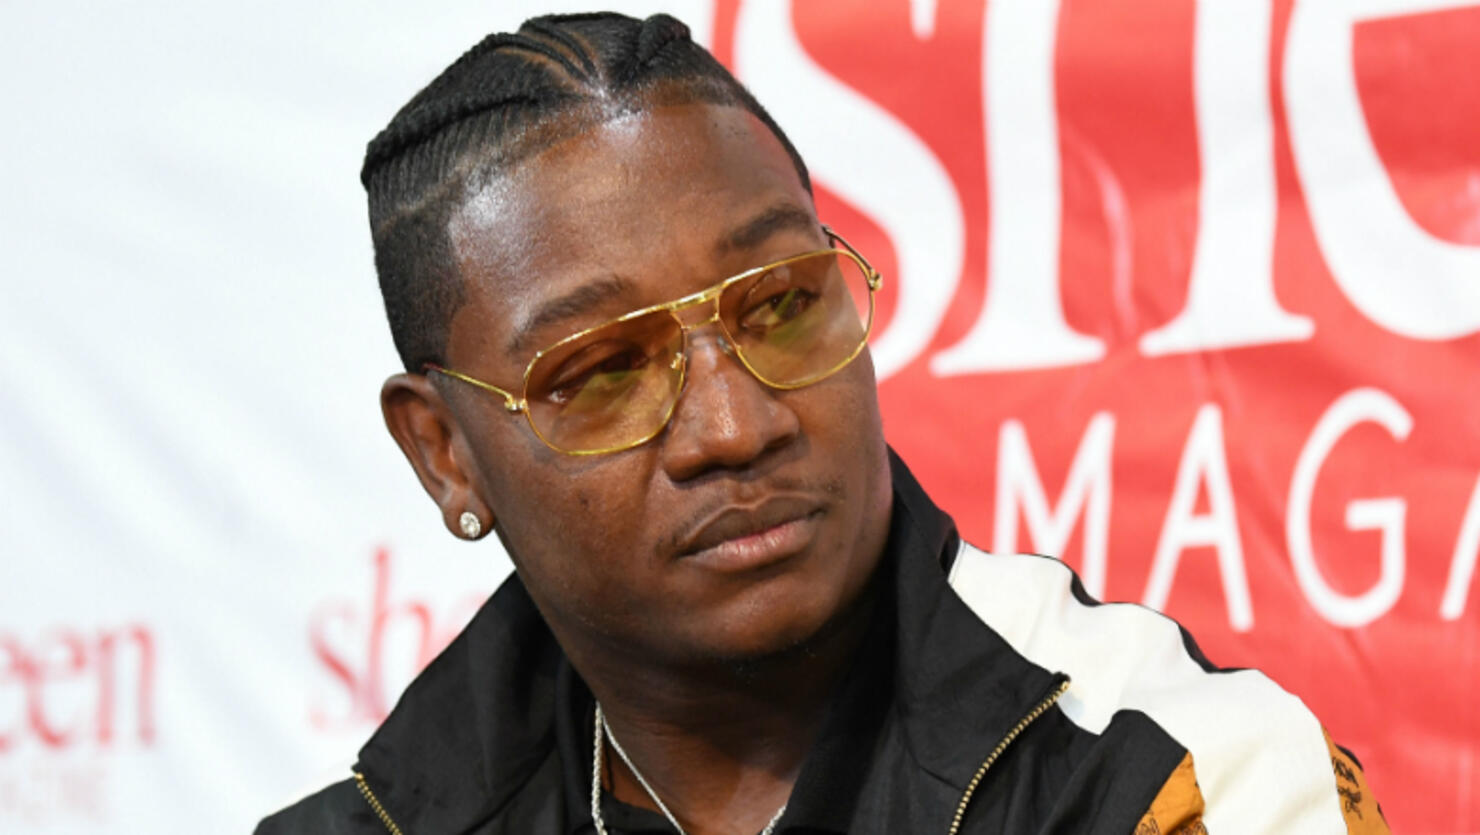 Yung Joc Speaks Out After Being Shamed For Driving For A Rideshare App